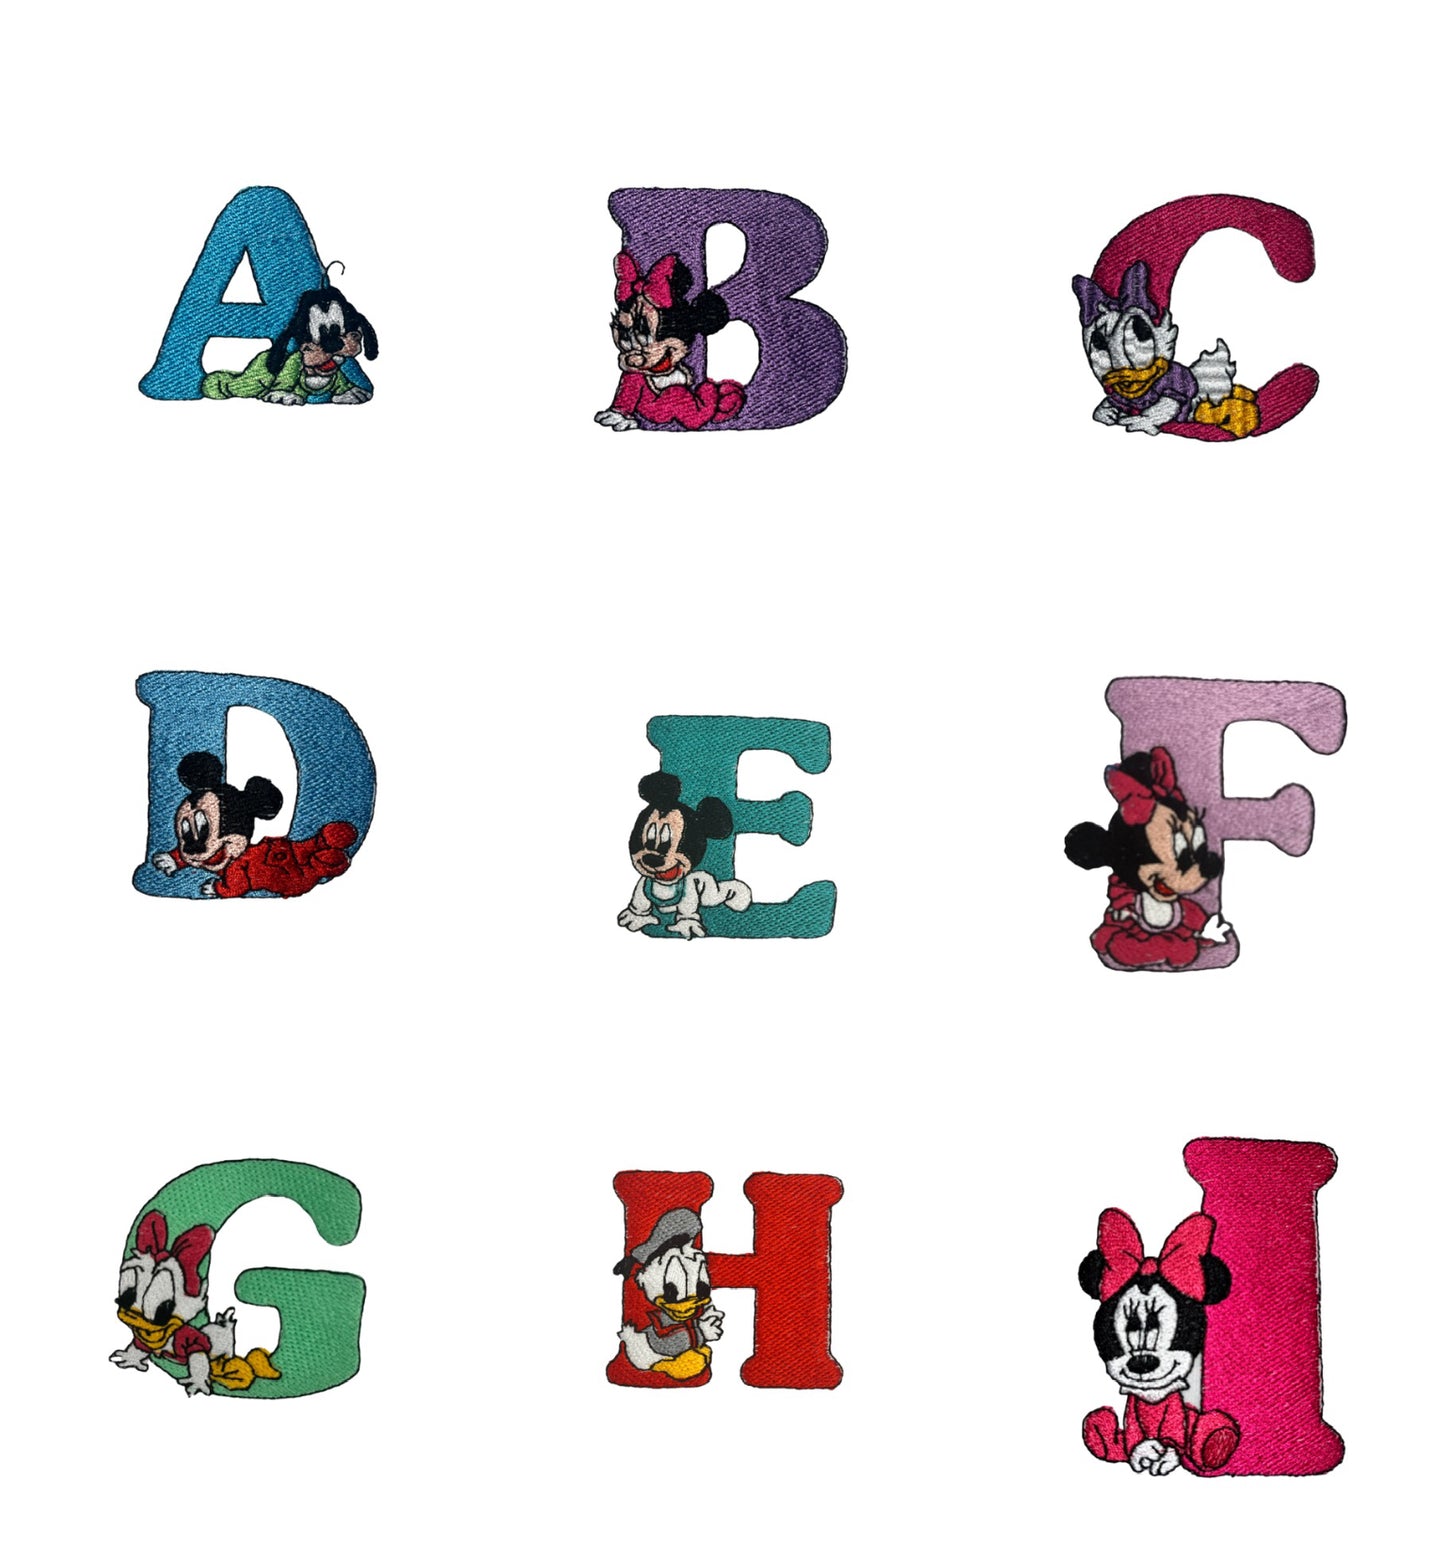 Disney Initials Blanket available in White, Pink or Blue